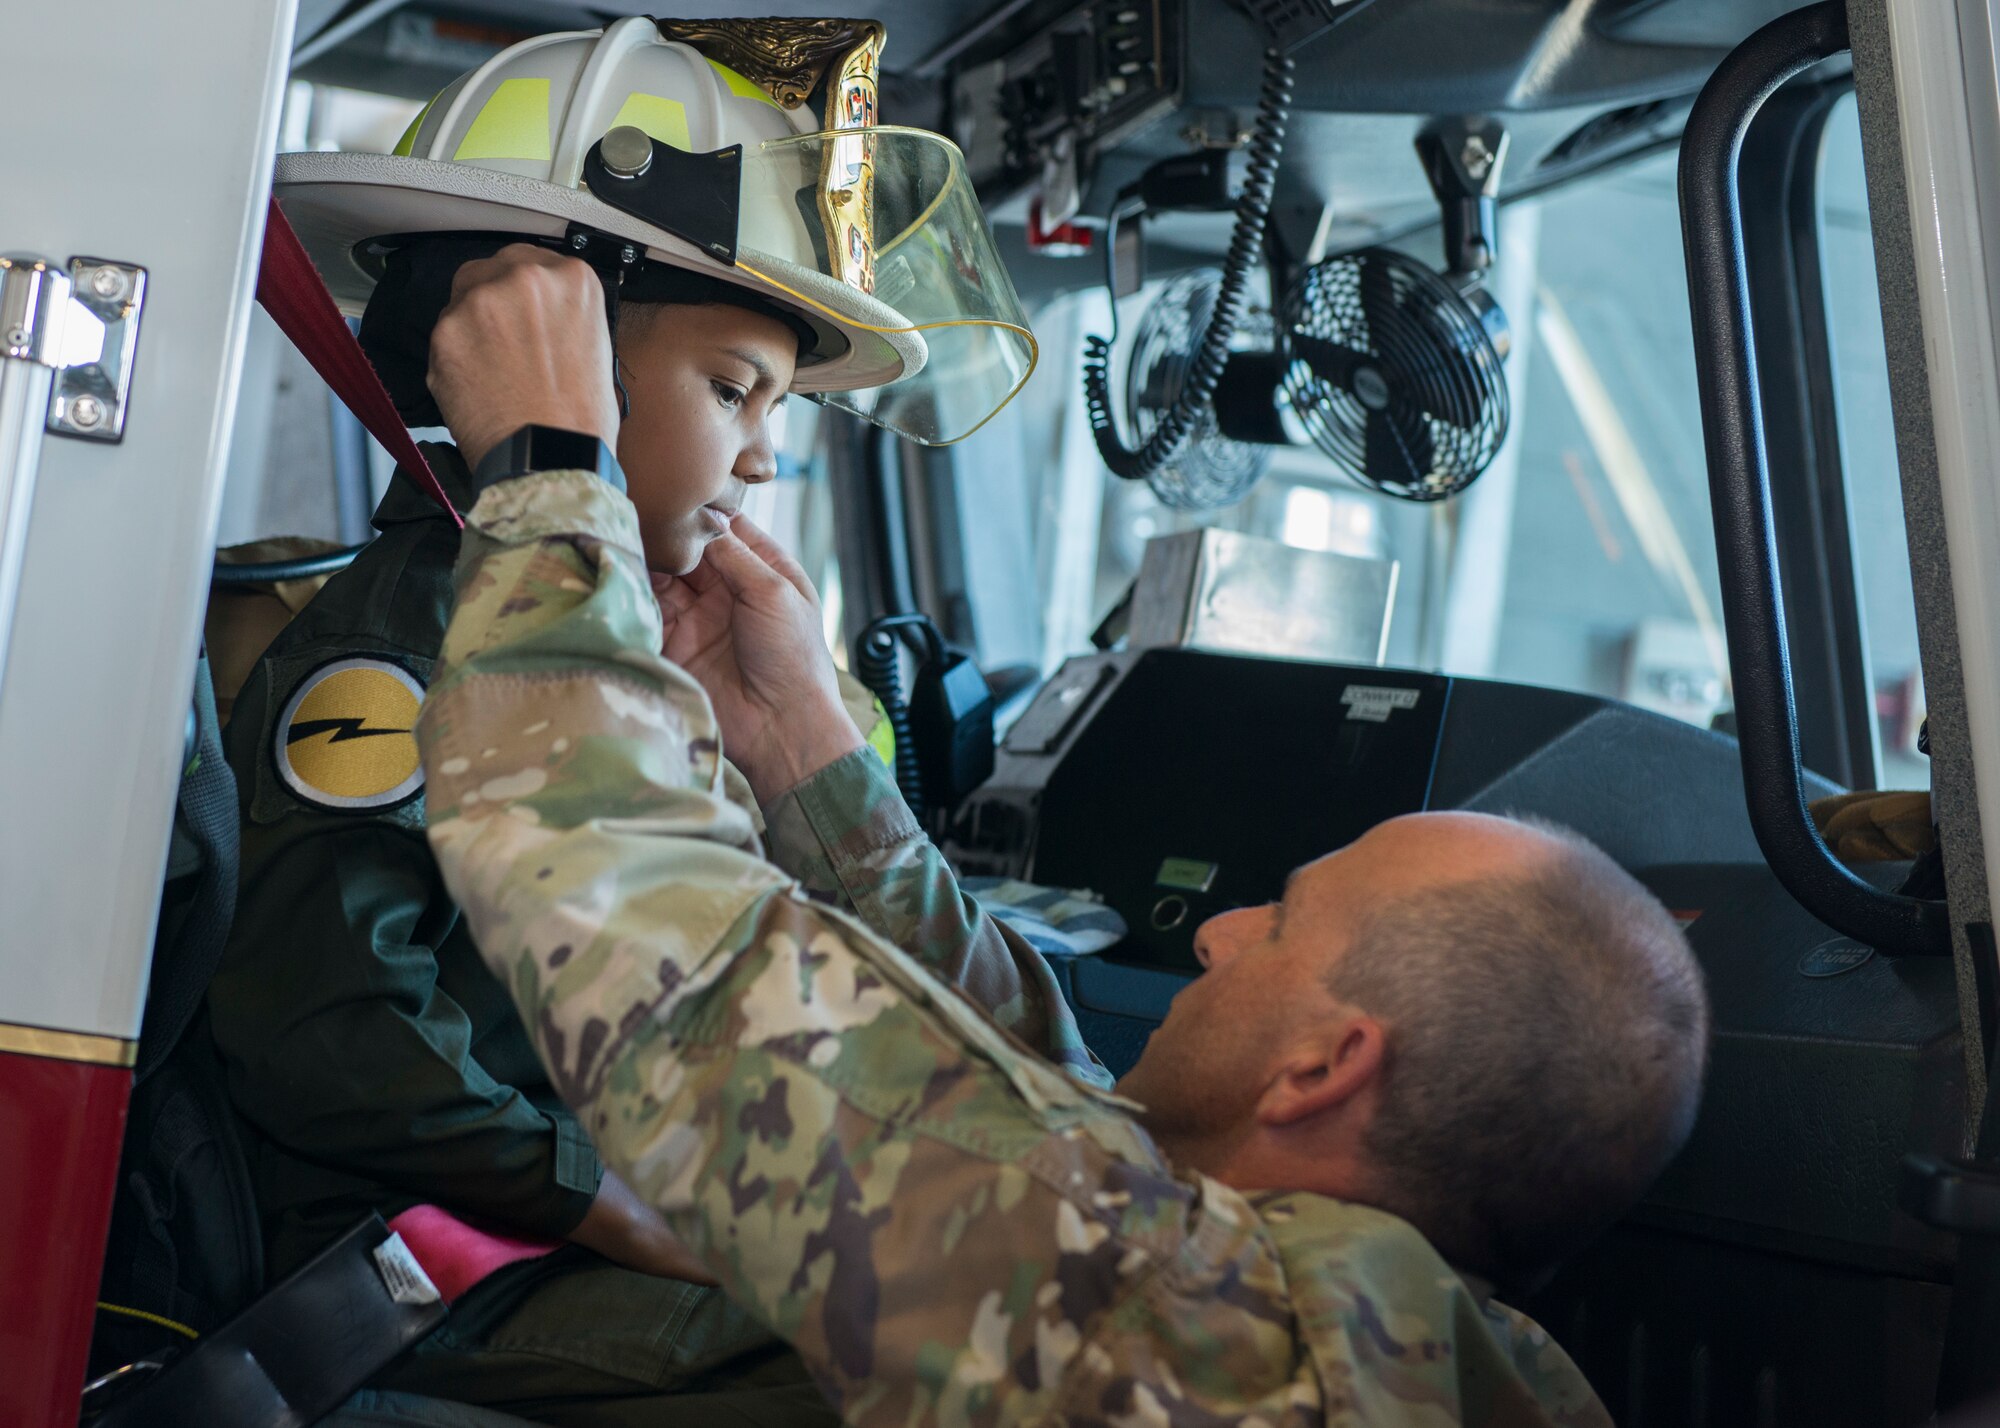 Chief Master Sgt. Robert Cross, 103rd Civil Engineer Squadron fire chief, fits his helmet on Jadiel Aponte, 103rd Airlift Wing honorary Pilot for a Day, during the wing’s annual Pilot for a Day event at Bradley Air National Guard Base, East Granby, Conn. Sept. 19, 2019. The program puts the wing in partnership with local hospitals to identify a child with a life-threatening or terminal illness and bring them on base to meet members of the wing and learn about its mission. (U.S. Air National Guard photo by Staff Sgt. Steven Tucker)